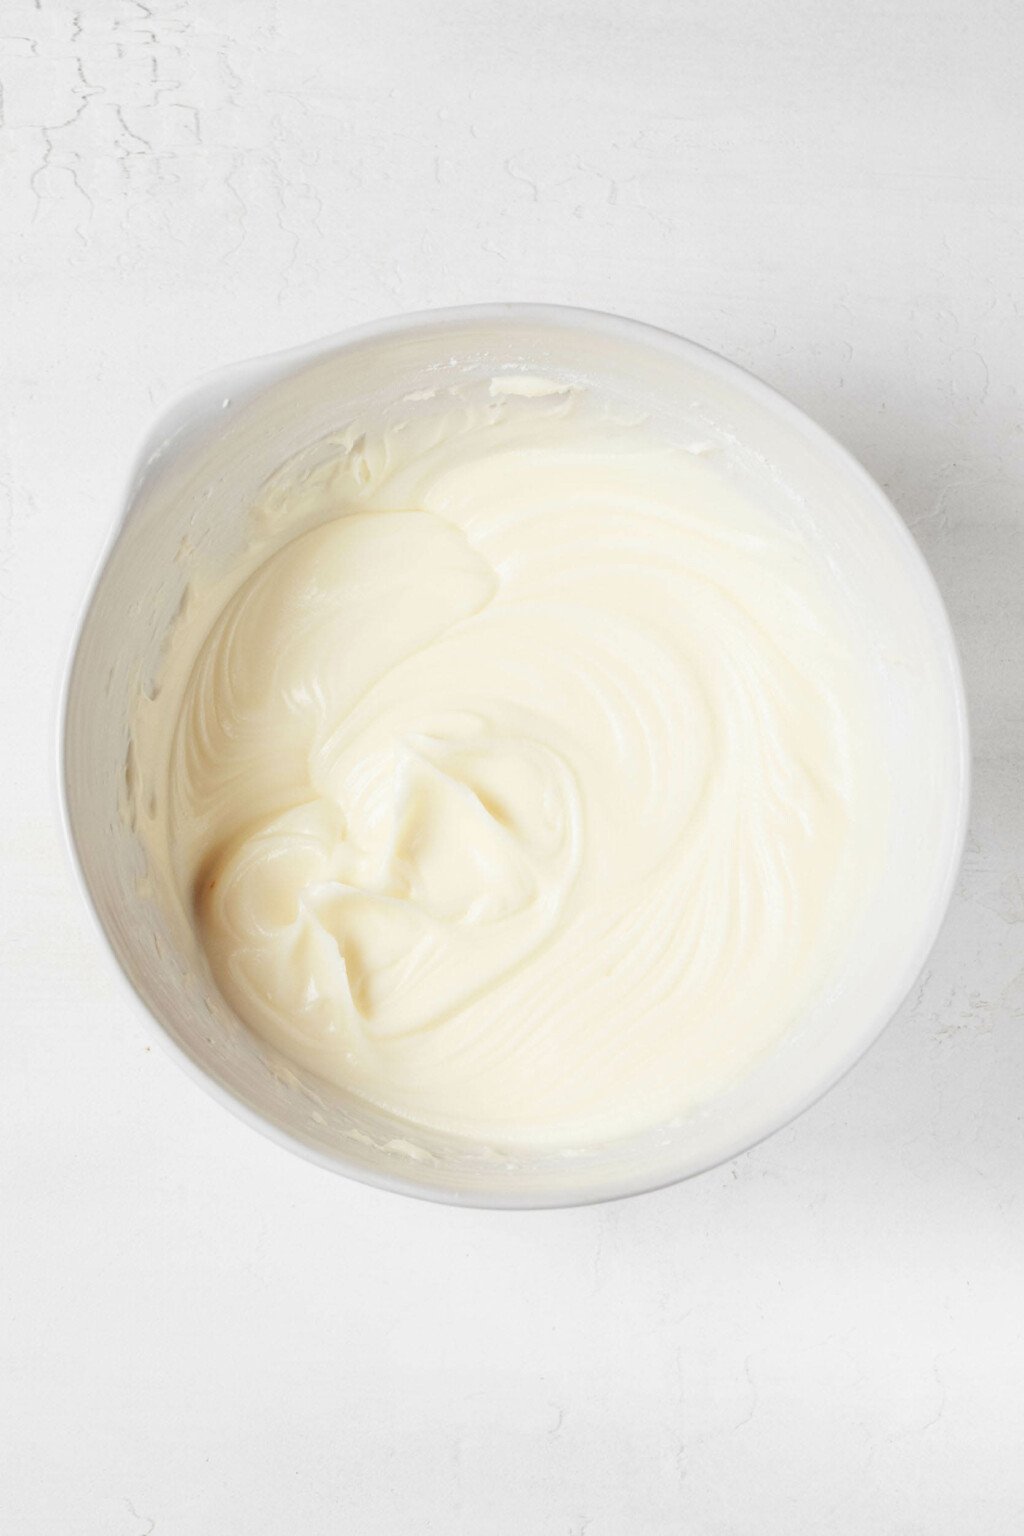 An image of a white bowl, which is filled with freshly beaten vegan cream cheese frosting.